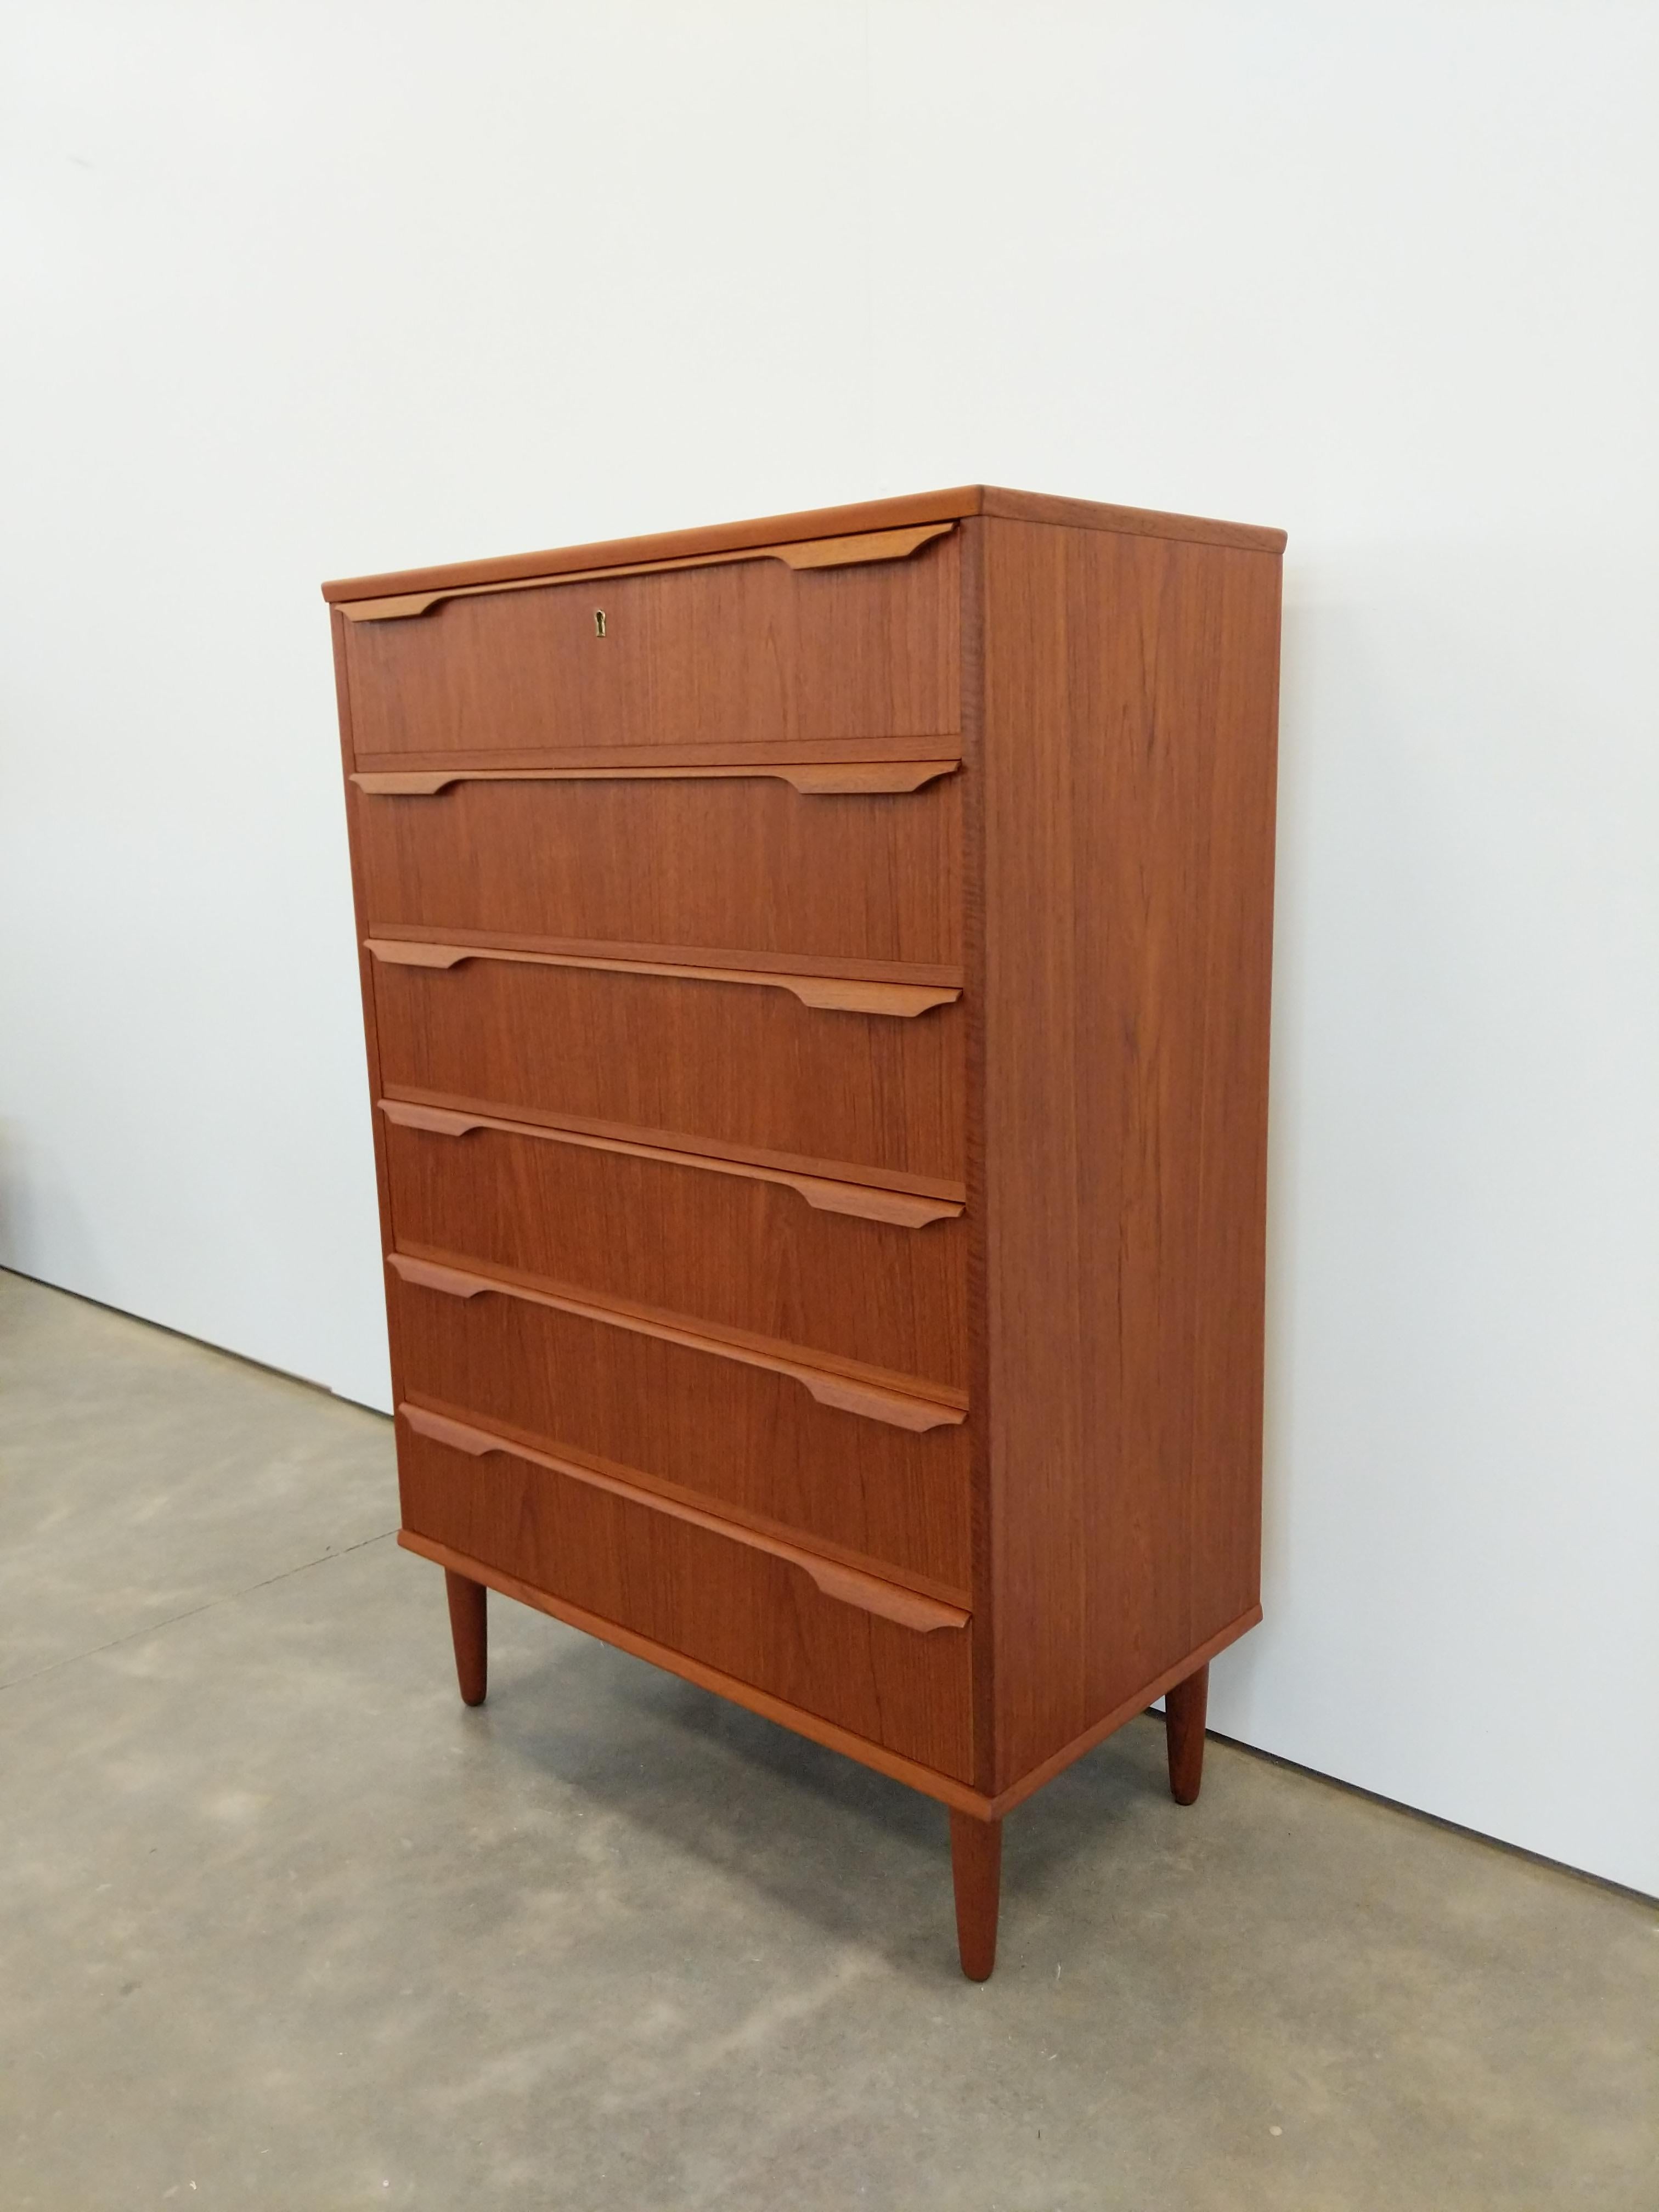 Authentic vintage mid century Danish / Scandinavian Modern teak dresser / chest of drawers.

This piece is in excellent refinished condition with very few signs of age-related wear (see photos).
If you would like any additional details, please